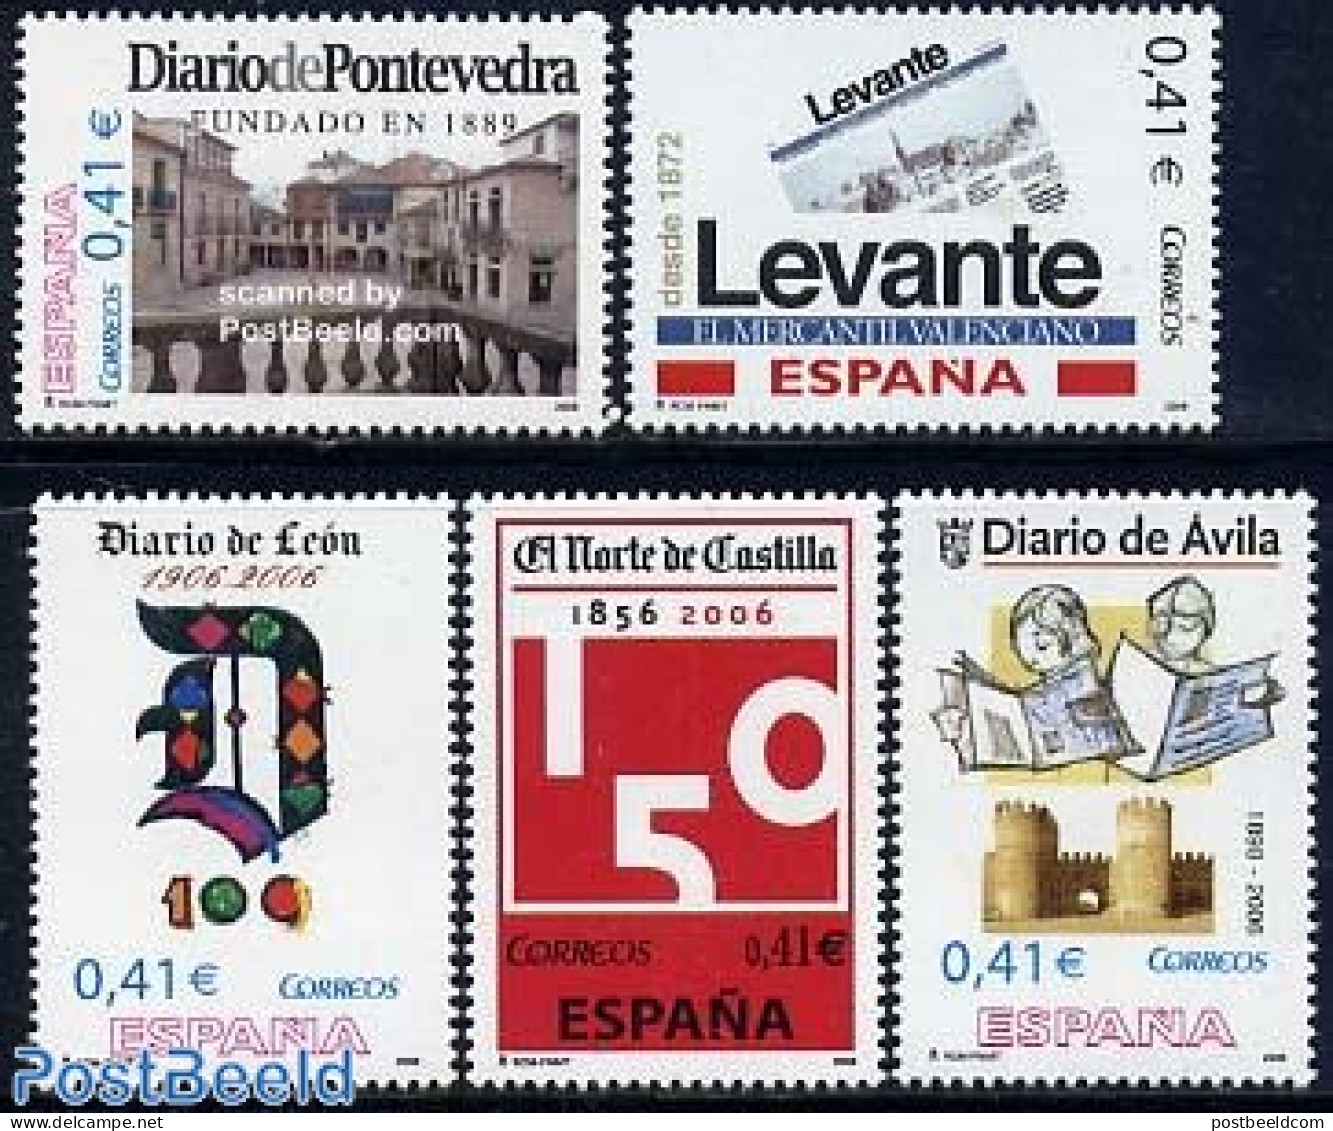 Spain 2006 Newspapers 5v, Mint NH, History - Newspapers & Journalism - Neufs